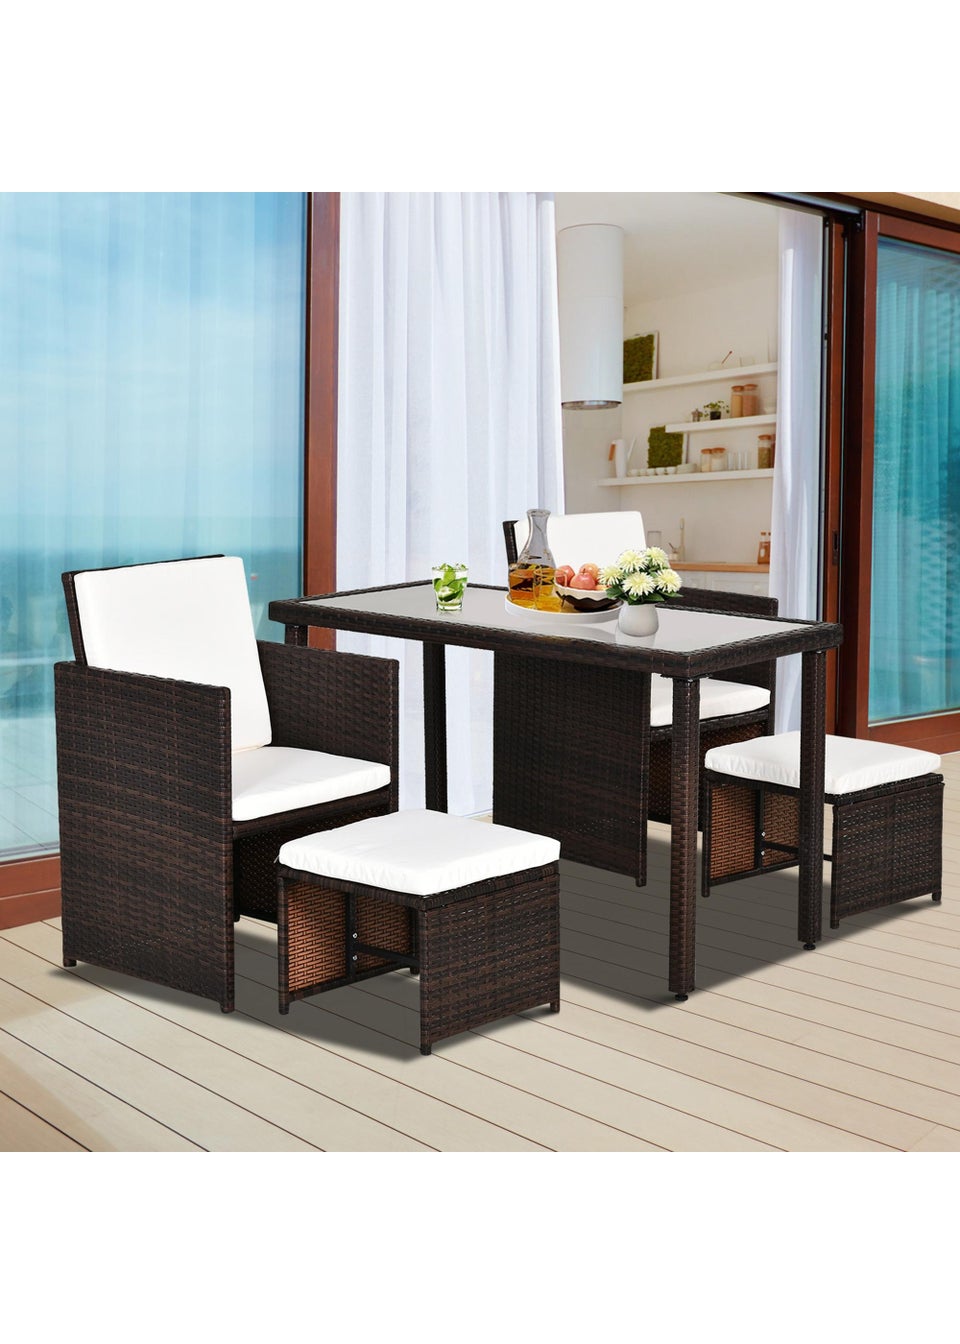 Outsunny 5 Pieces PE Rattan Dining Sets with Cushion